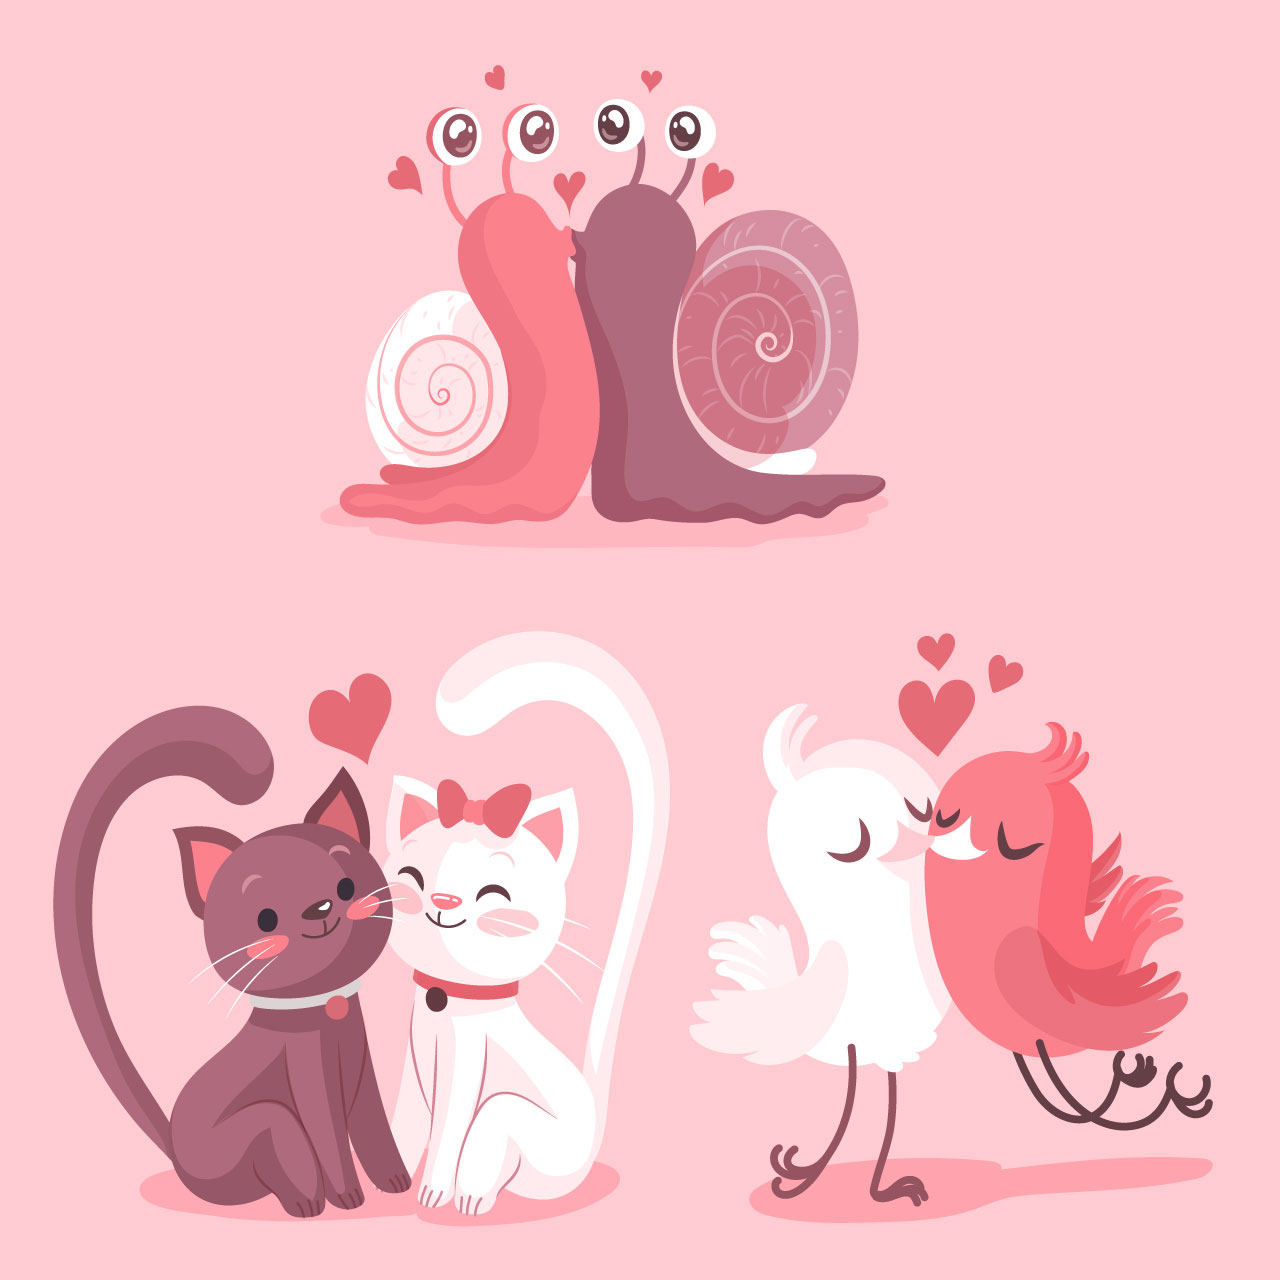 Love heart clipart cute valentine s day animal couple hand drawing sketch